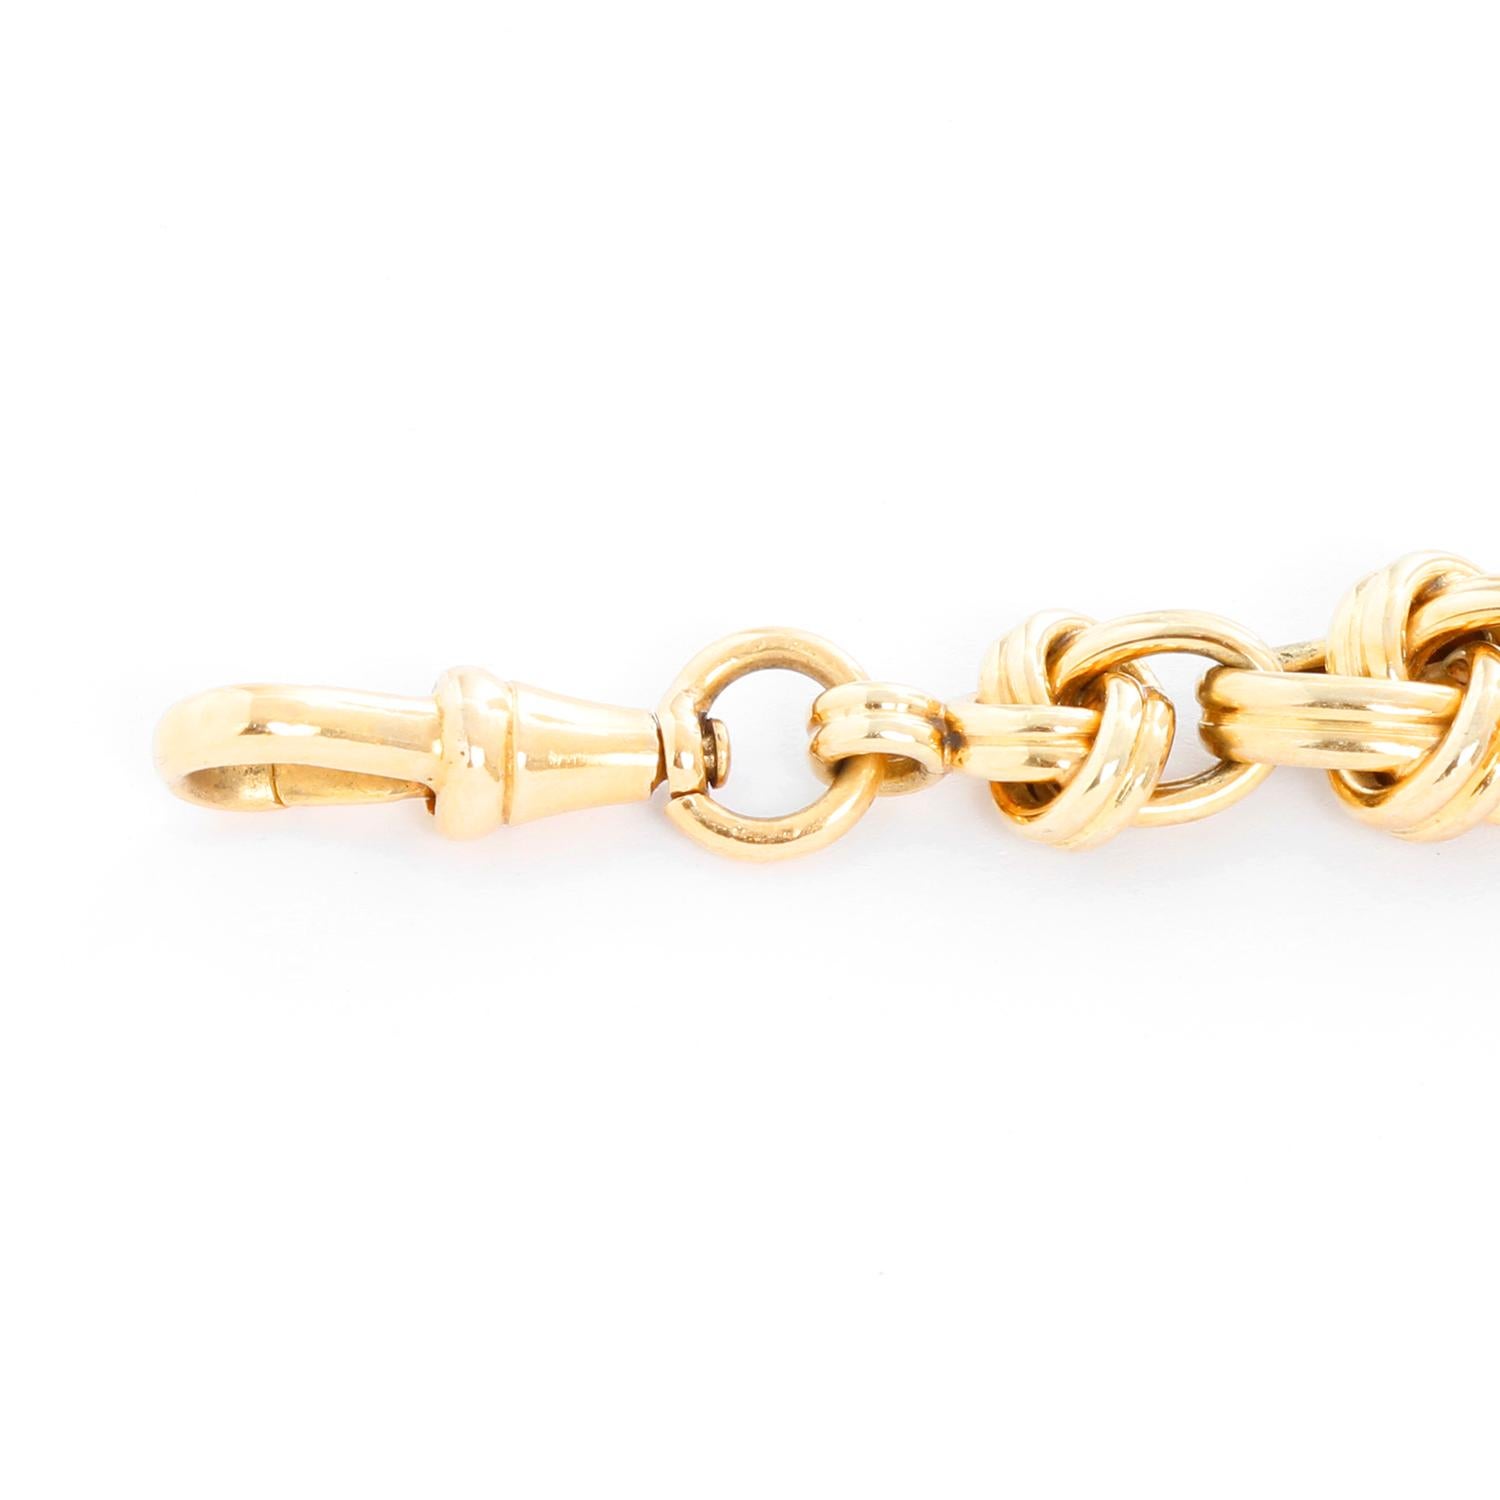 18K Yellow Gold Knot Lapel Pin - Pre-owned five knot lapel pin. Total length 3.5 inches. Total weight 13.2 grams. .